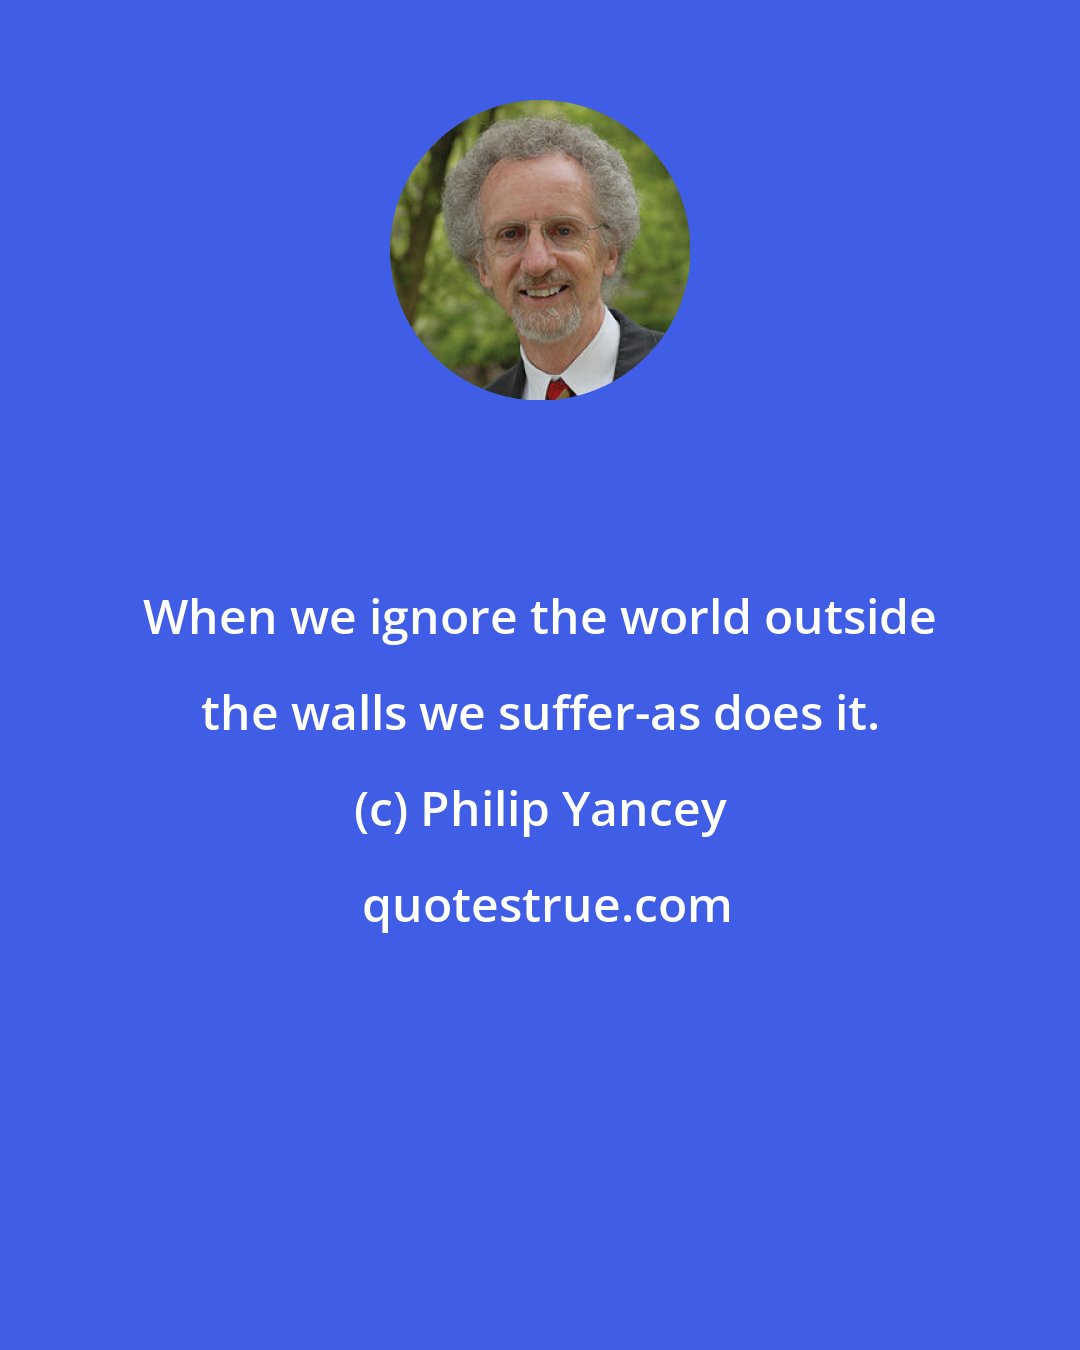 Philip Yancey: When we ignore the world outside the walls we suffer-as does it.